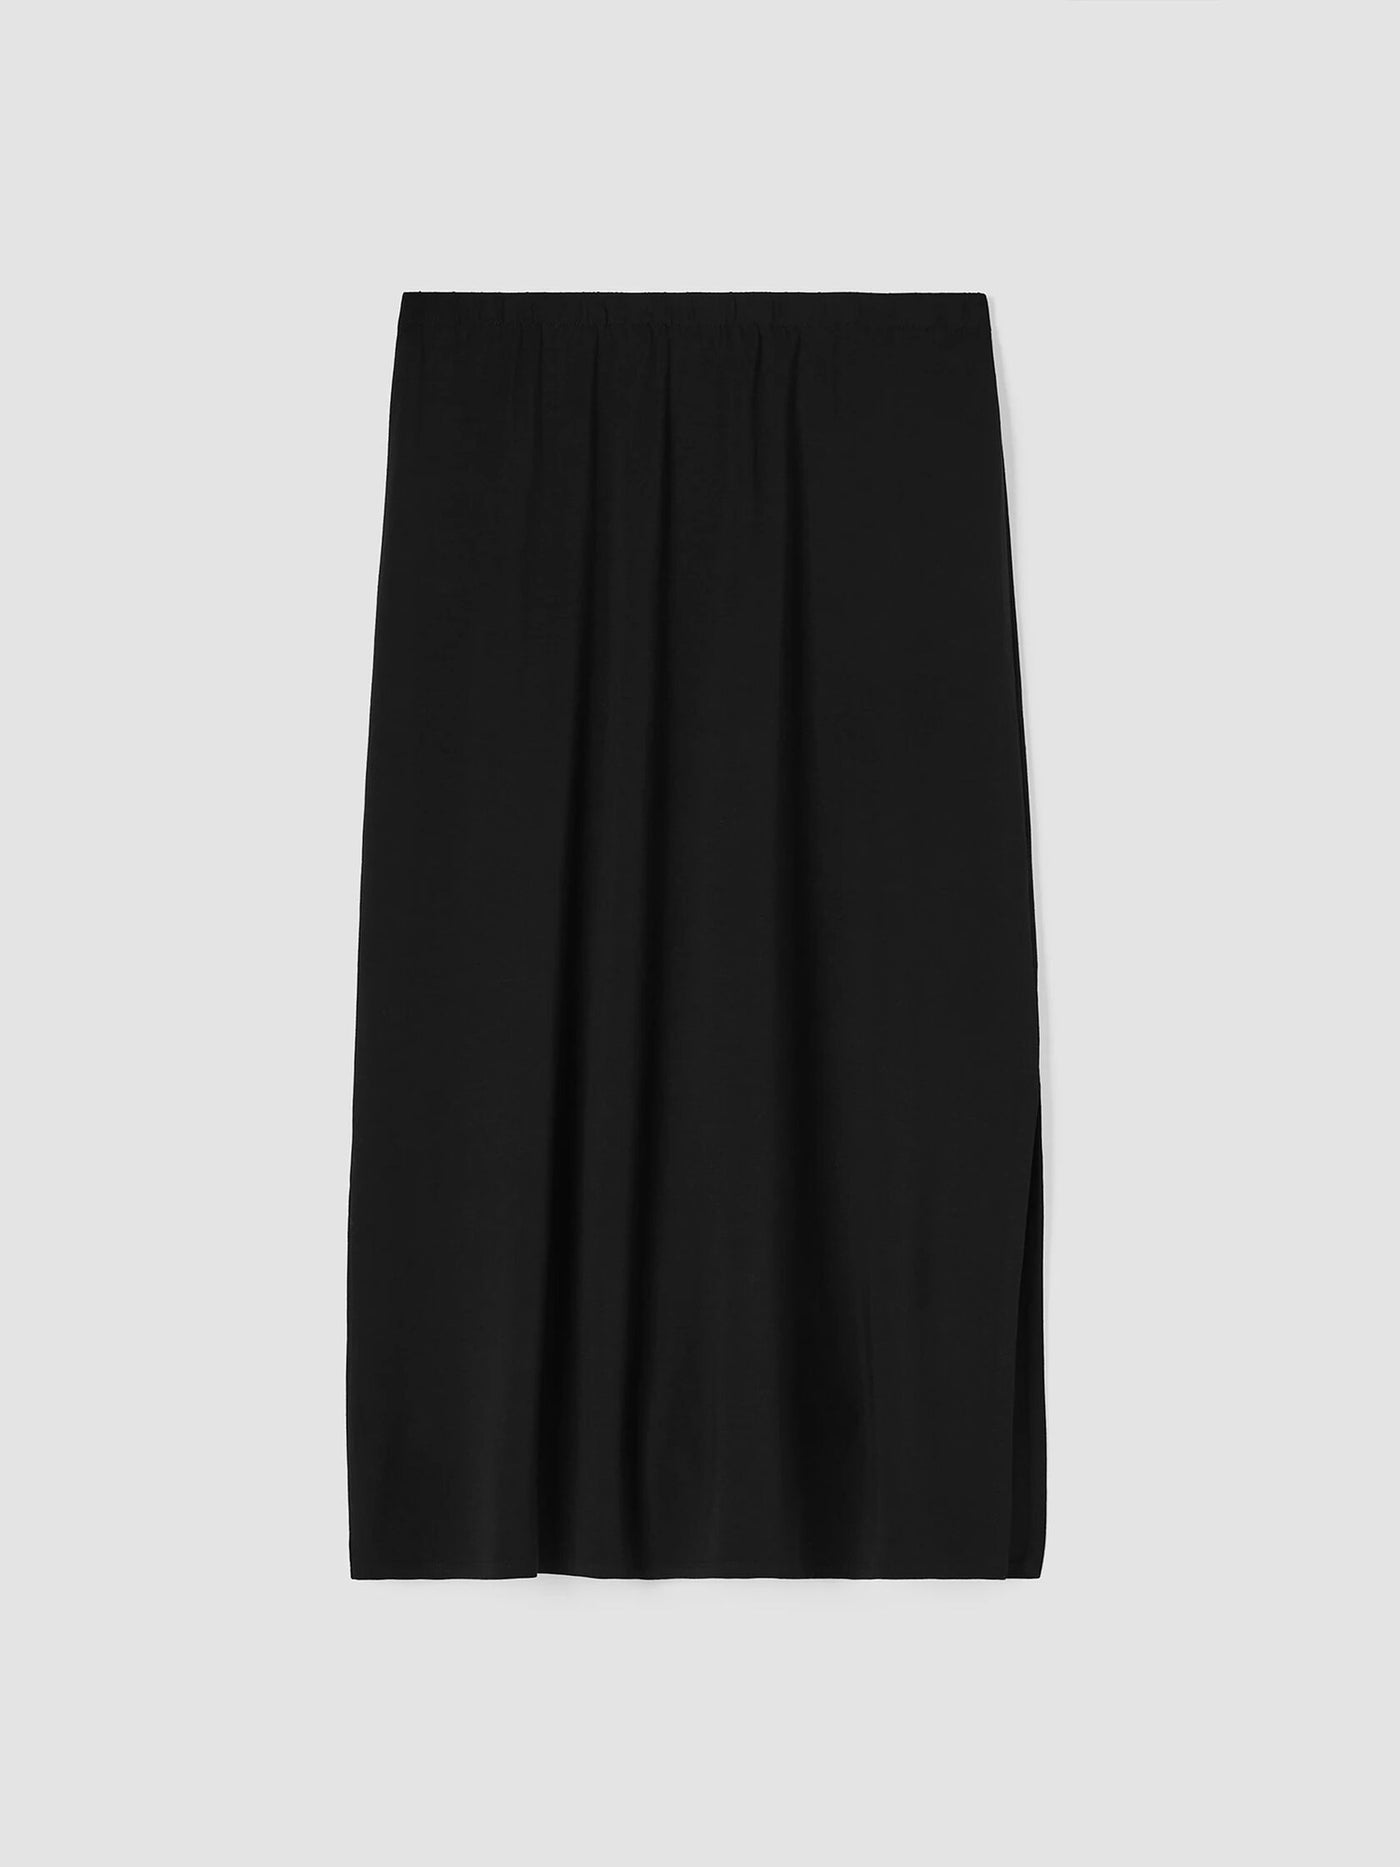 Eileen Fisher Stretch Jersey Knit Long Straight Skirt with Side Slit in Black